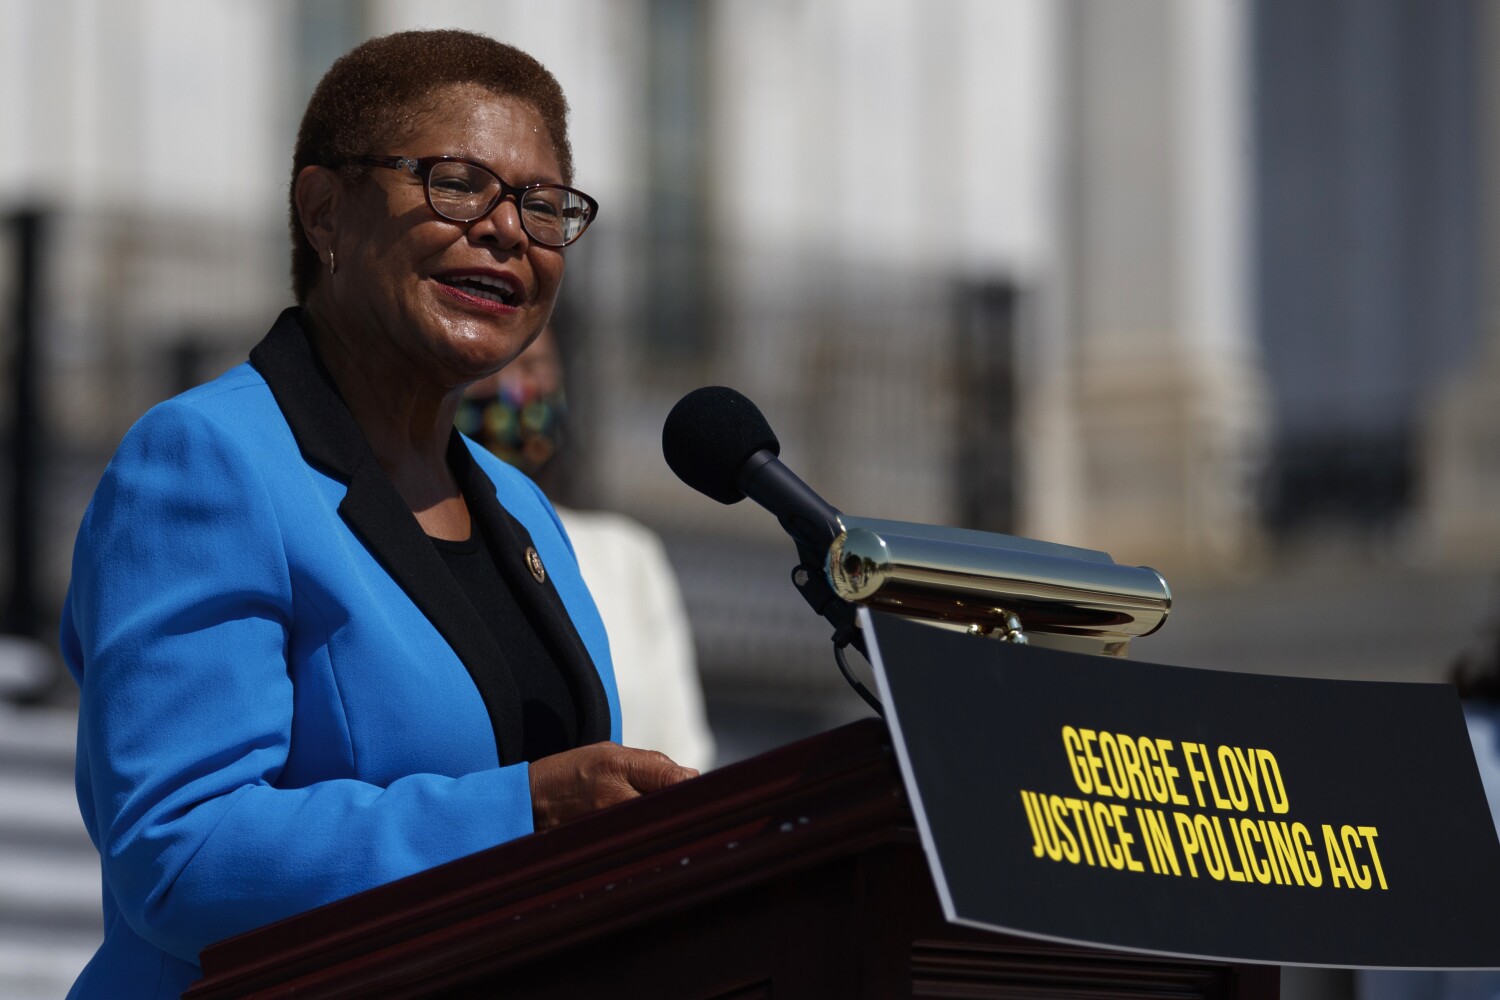 Rep. Karen Bass is being urged to run for L.A. mayor. She won't consider it 'at this time'